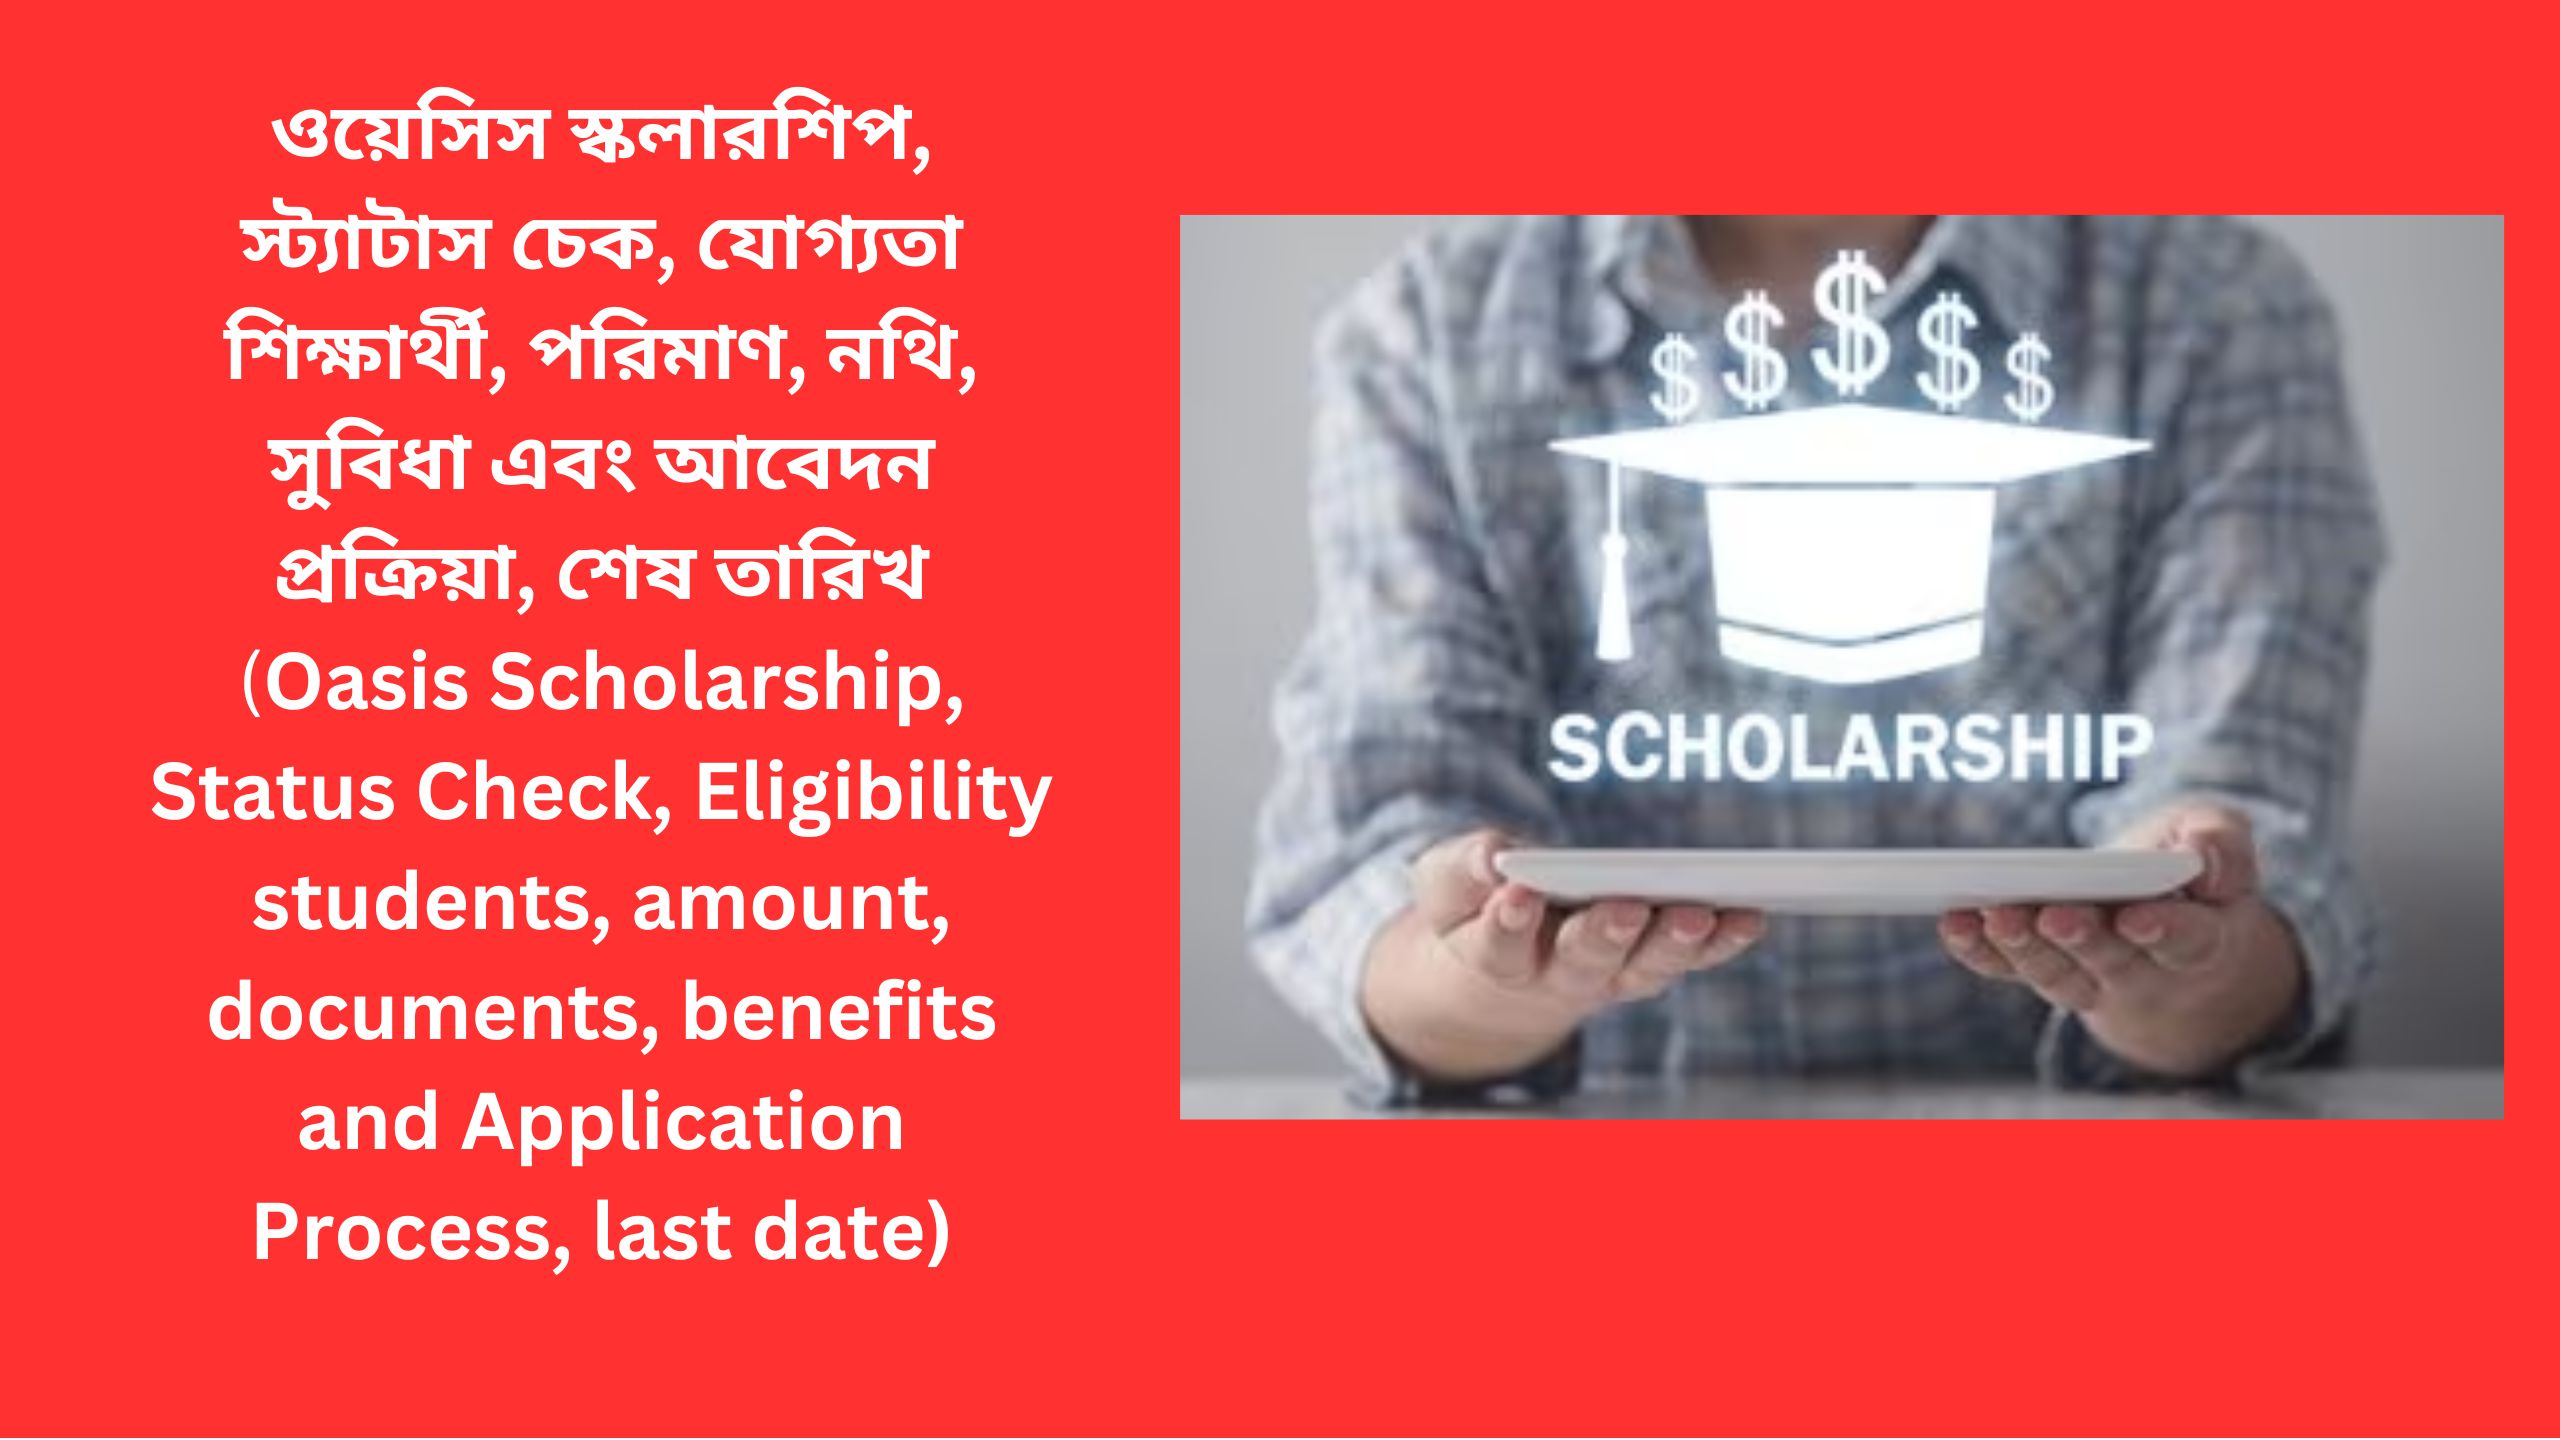 You are currently viewing Oasis Scholarship, Status Check, Eligibility students, amount, documents, benefits and Application Process, last date